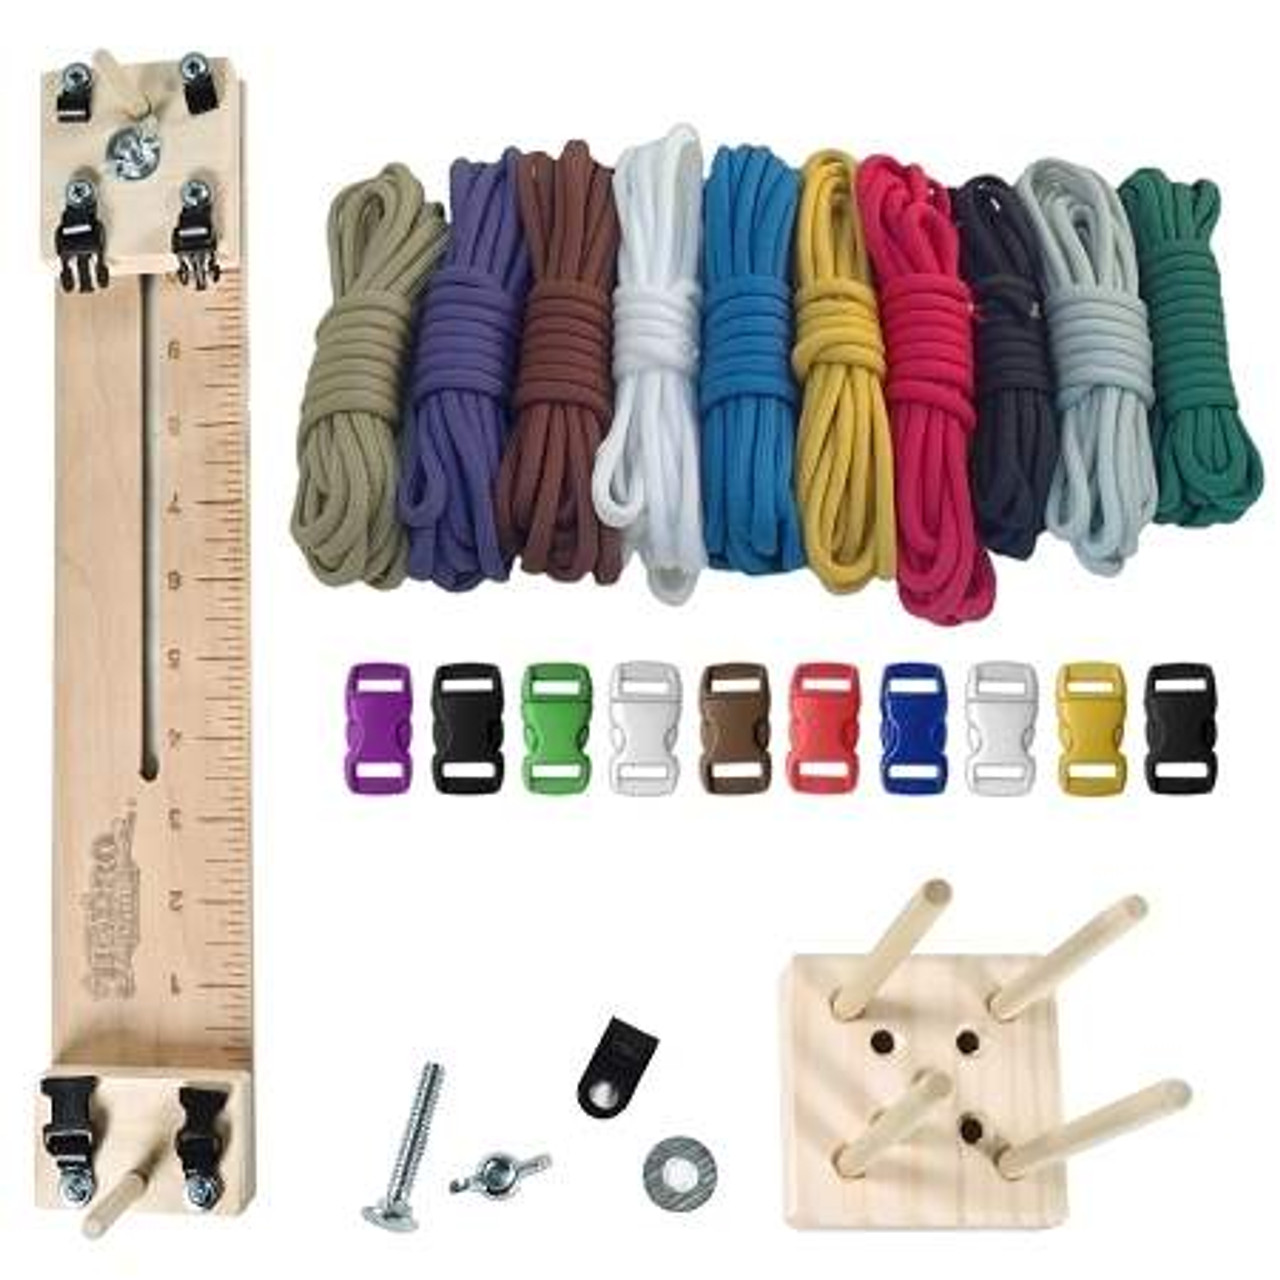 Paracord Crafting Kit w/ Pocket Pro Jig & Monkey Form - Primary